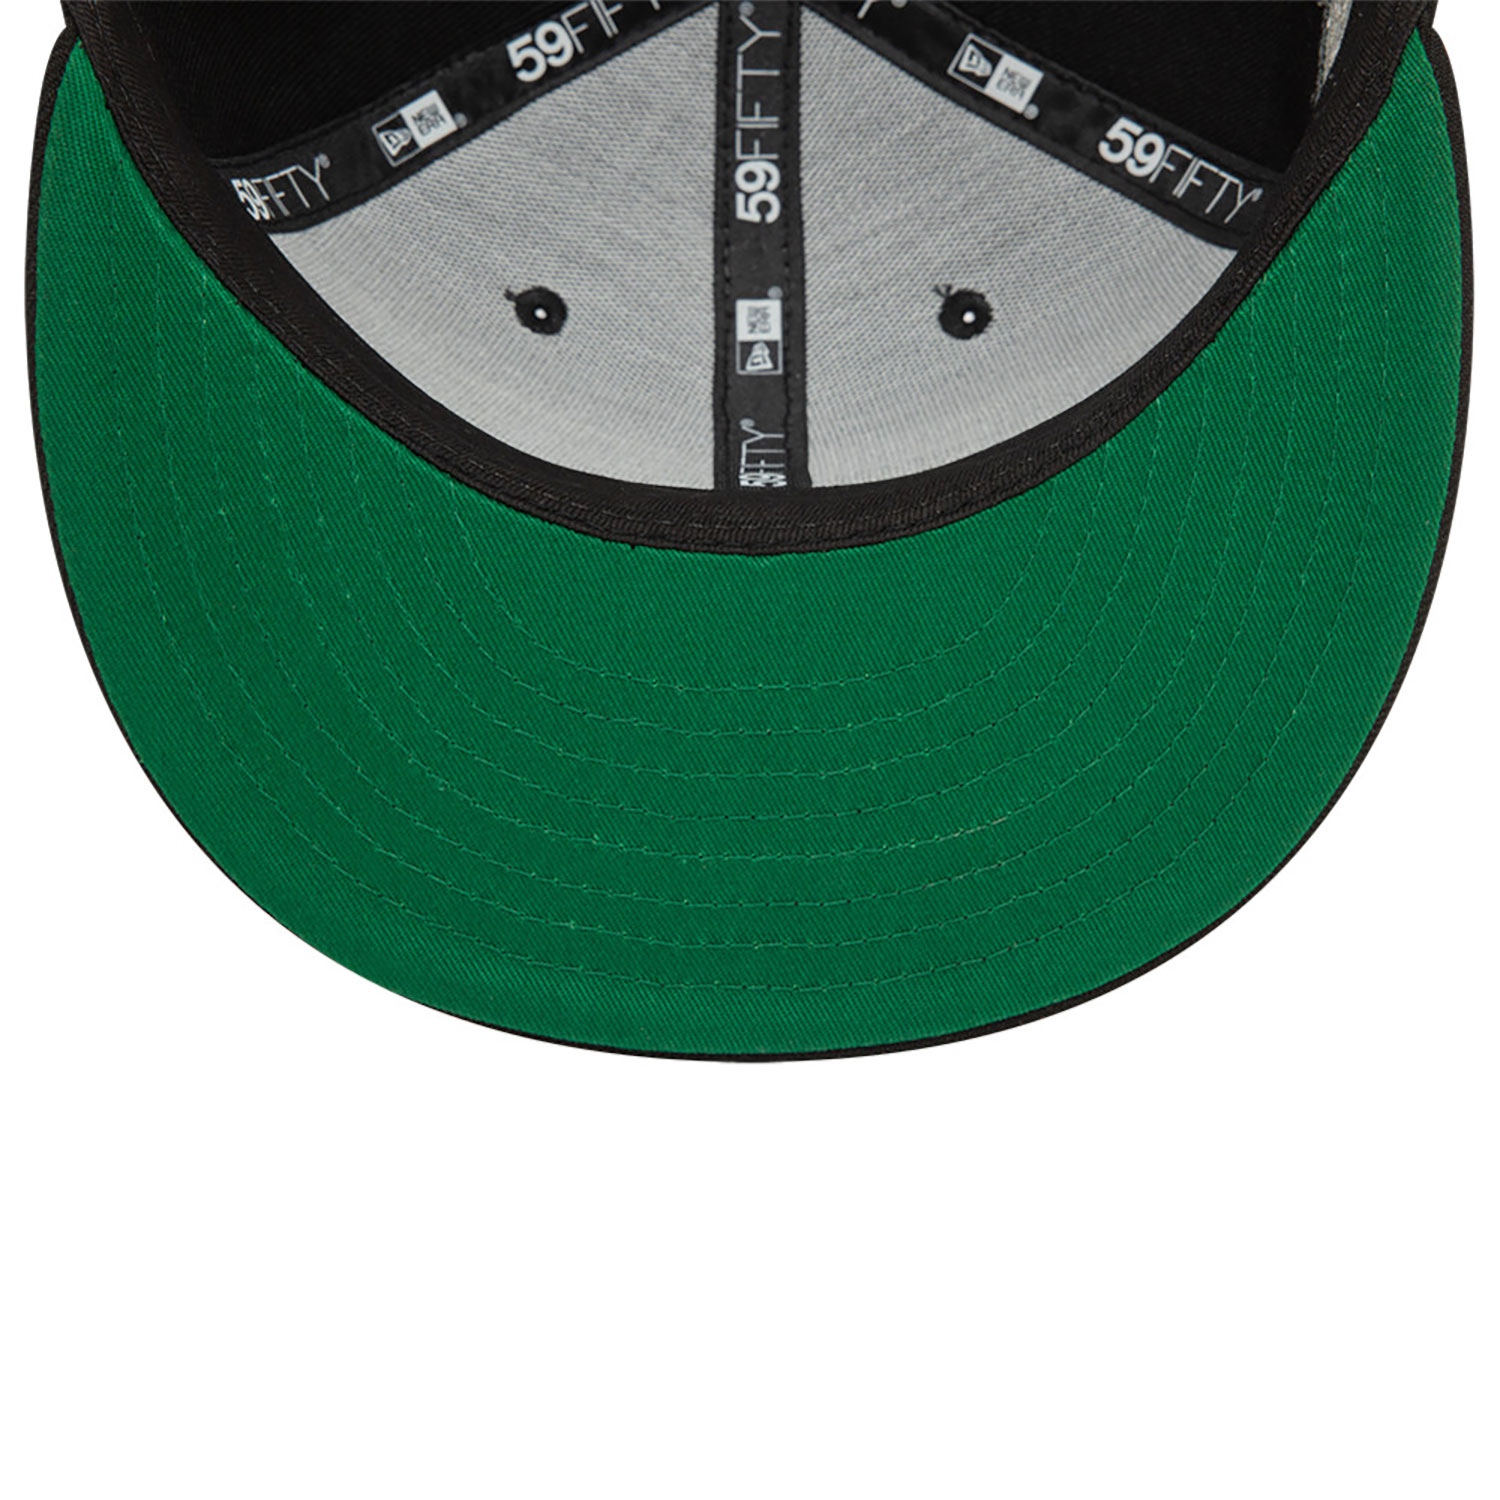 New Era Shield Black 59FIFTY Fitted Cap